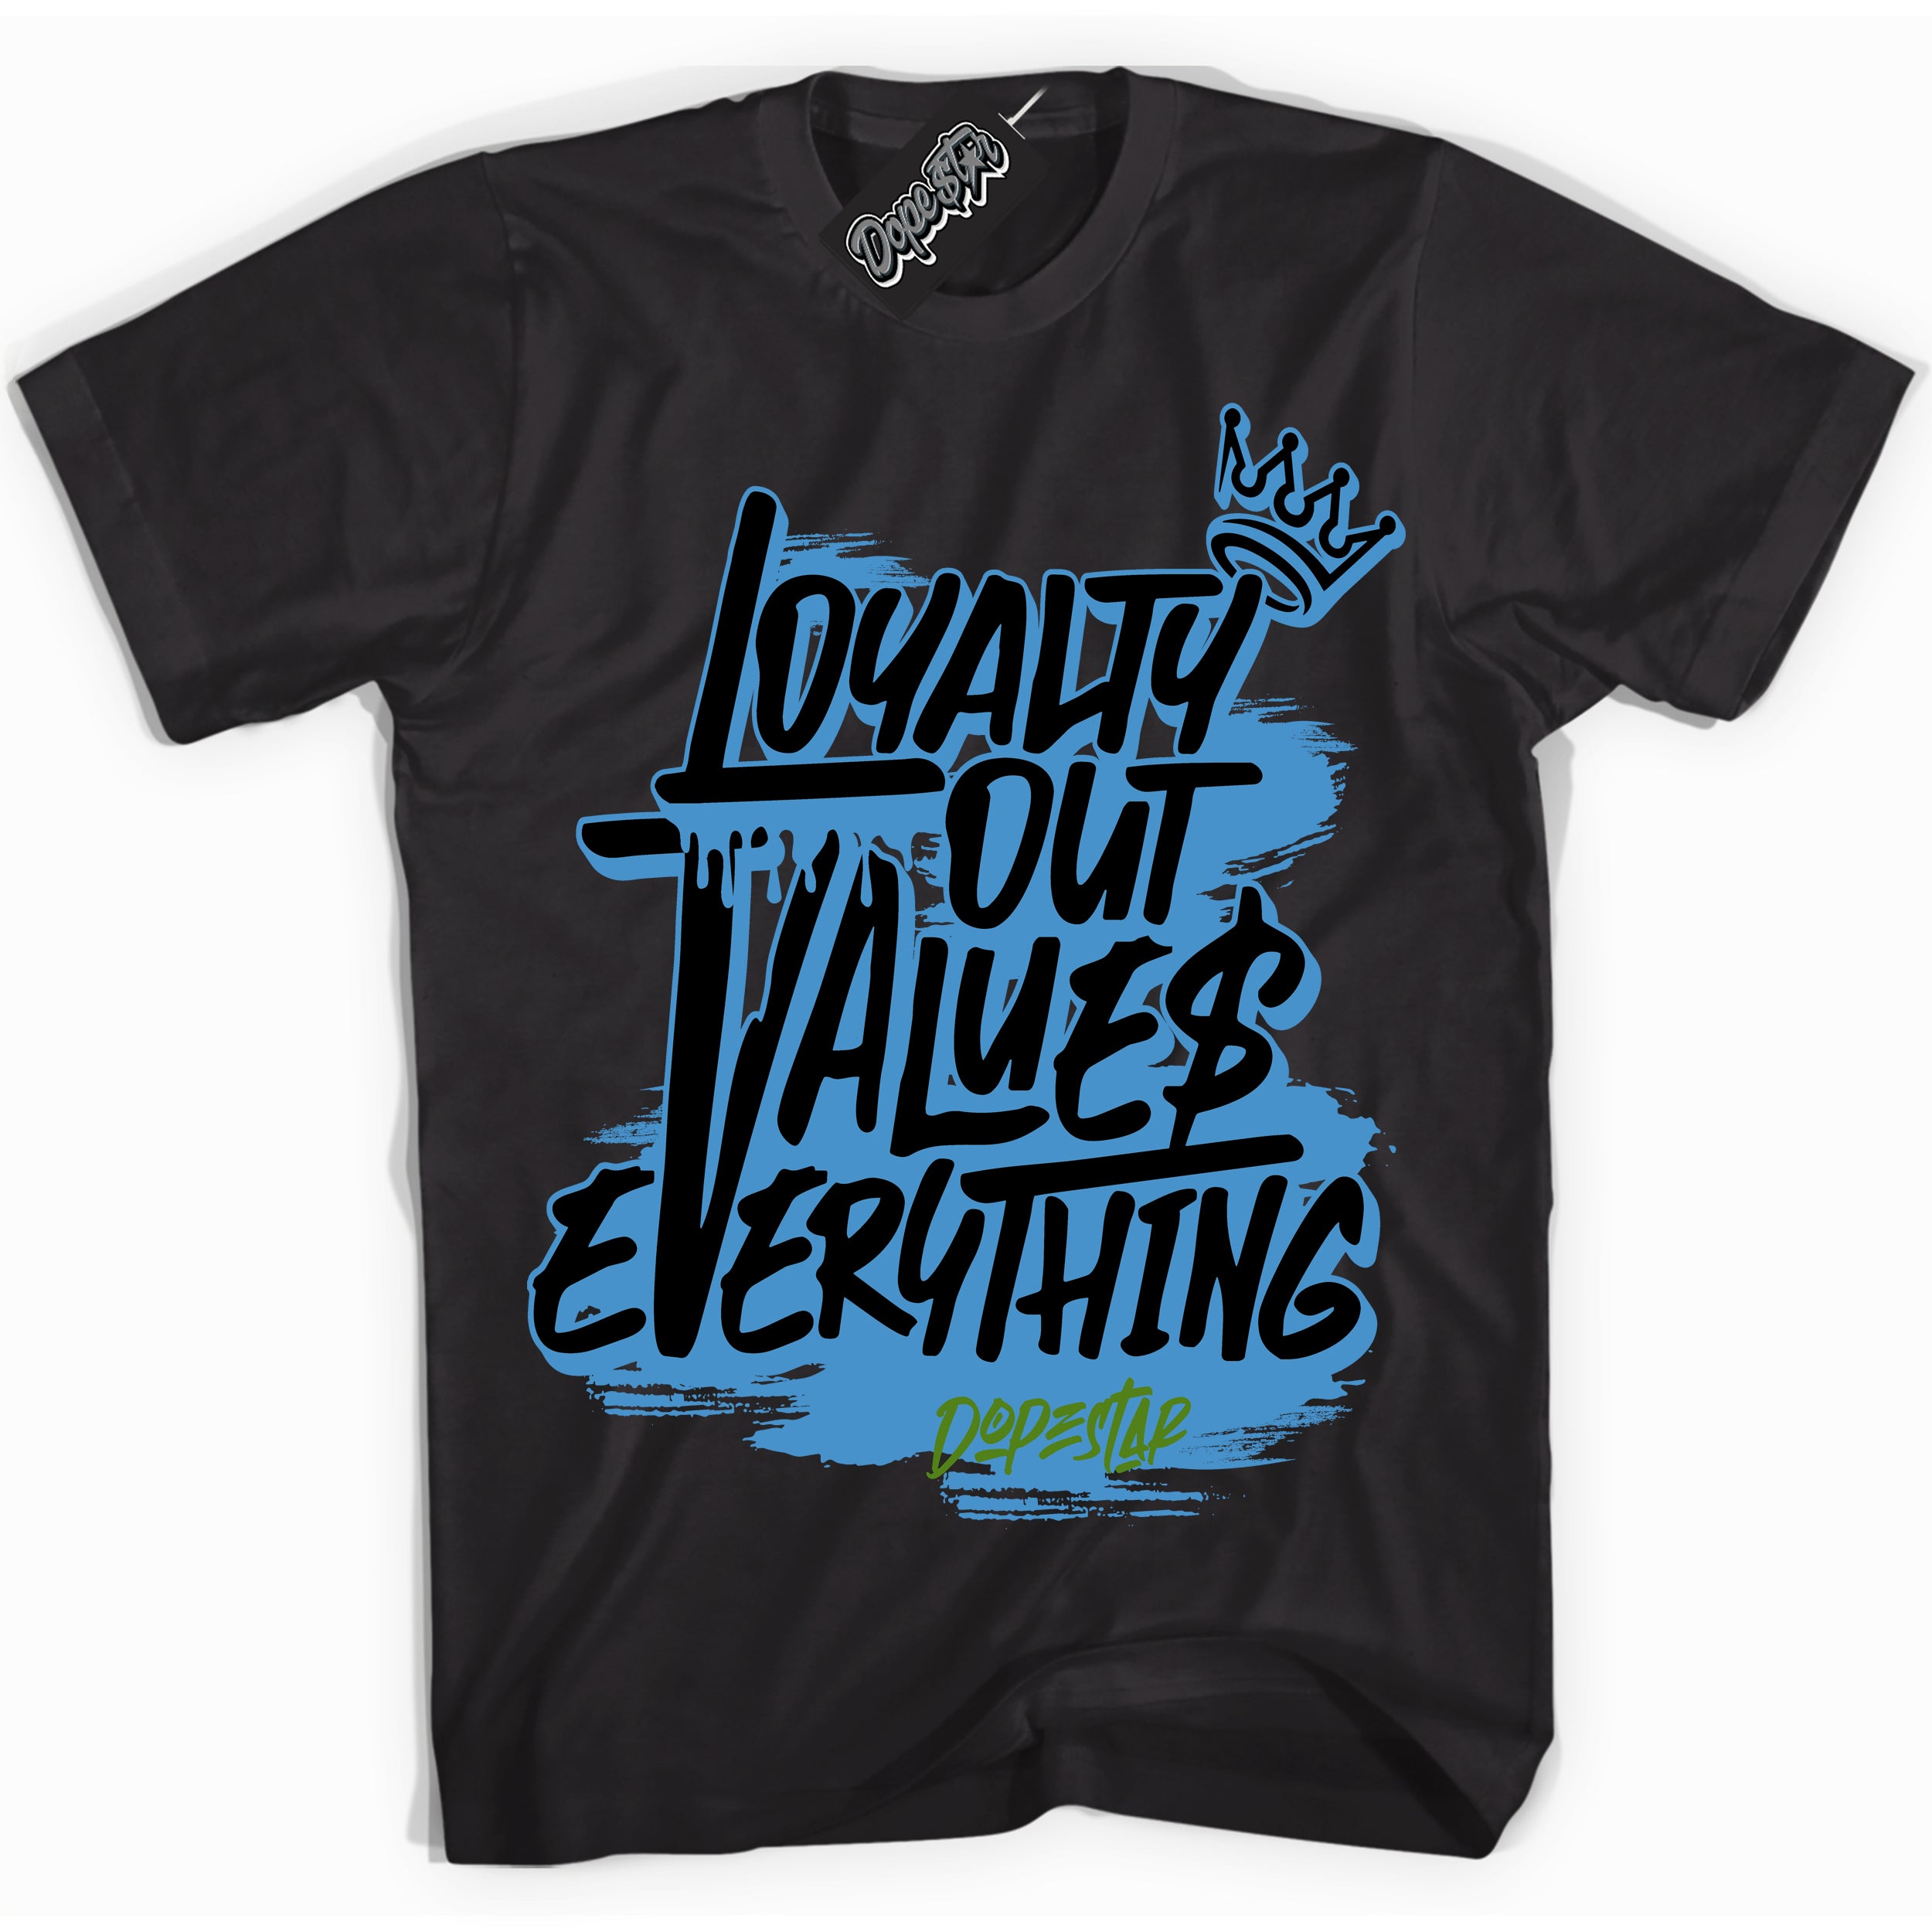 Cool Black Shirt with “ Loyalty Out Values Everything” design that perfectly matches Black University Blue 13s Sneakers.